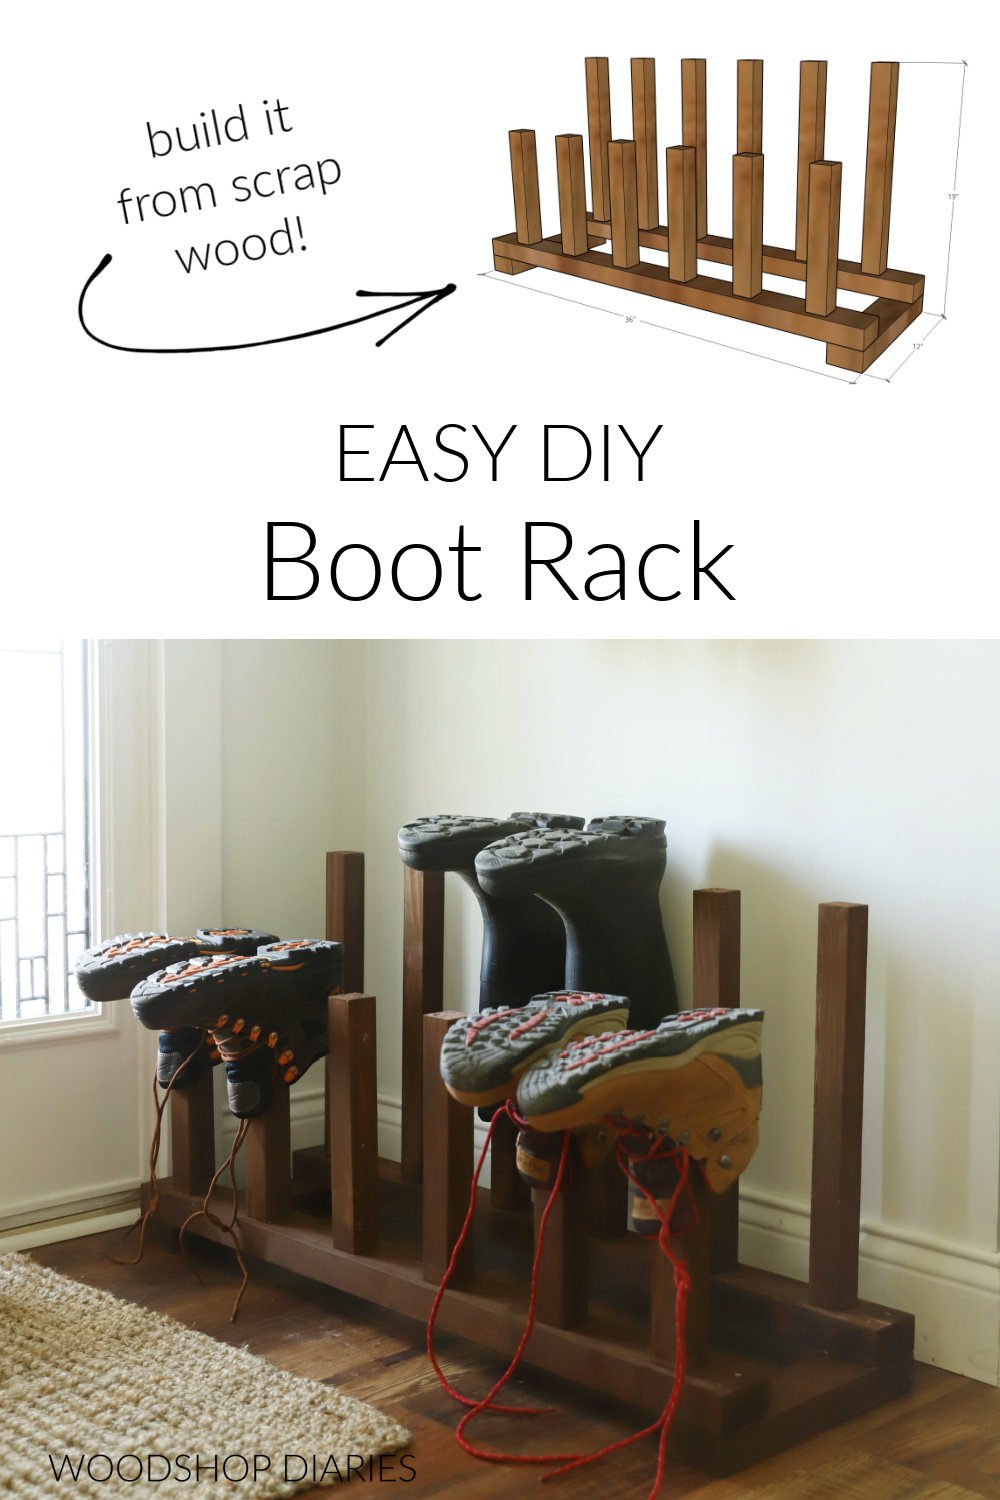 Pinterest collage showing dimensional diagram at top and completed boot rack on bottom with text "build it from scrap wood easy DIY boot rack"